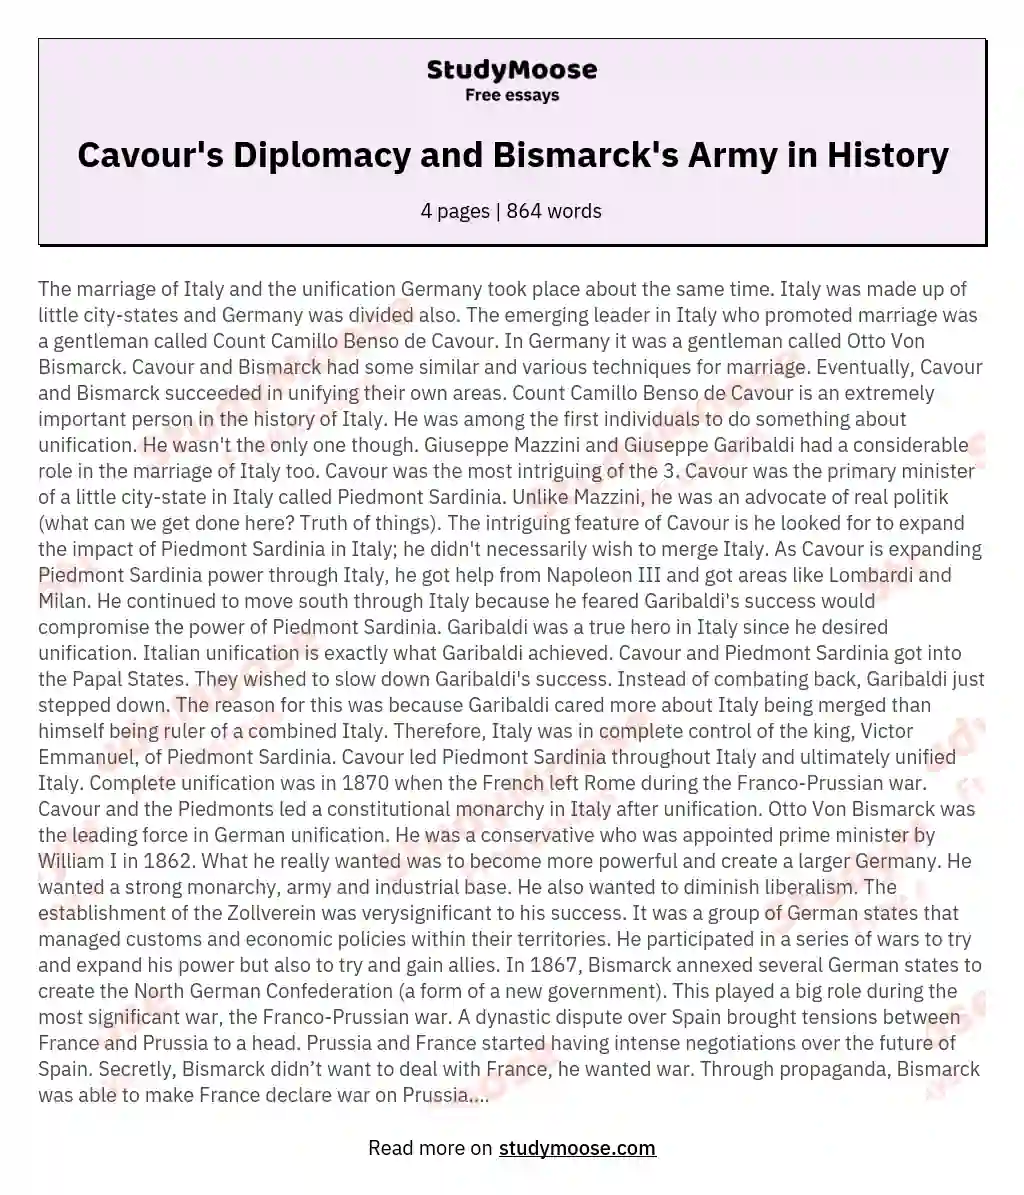 Cavour's Diplomacy and Bismarck's Army in History